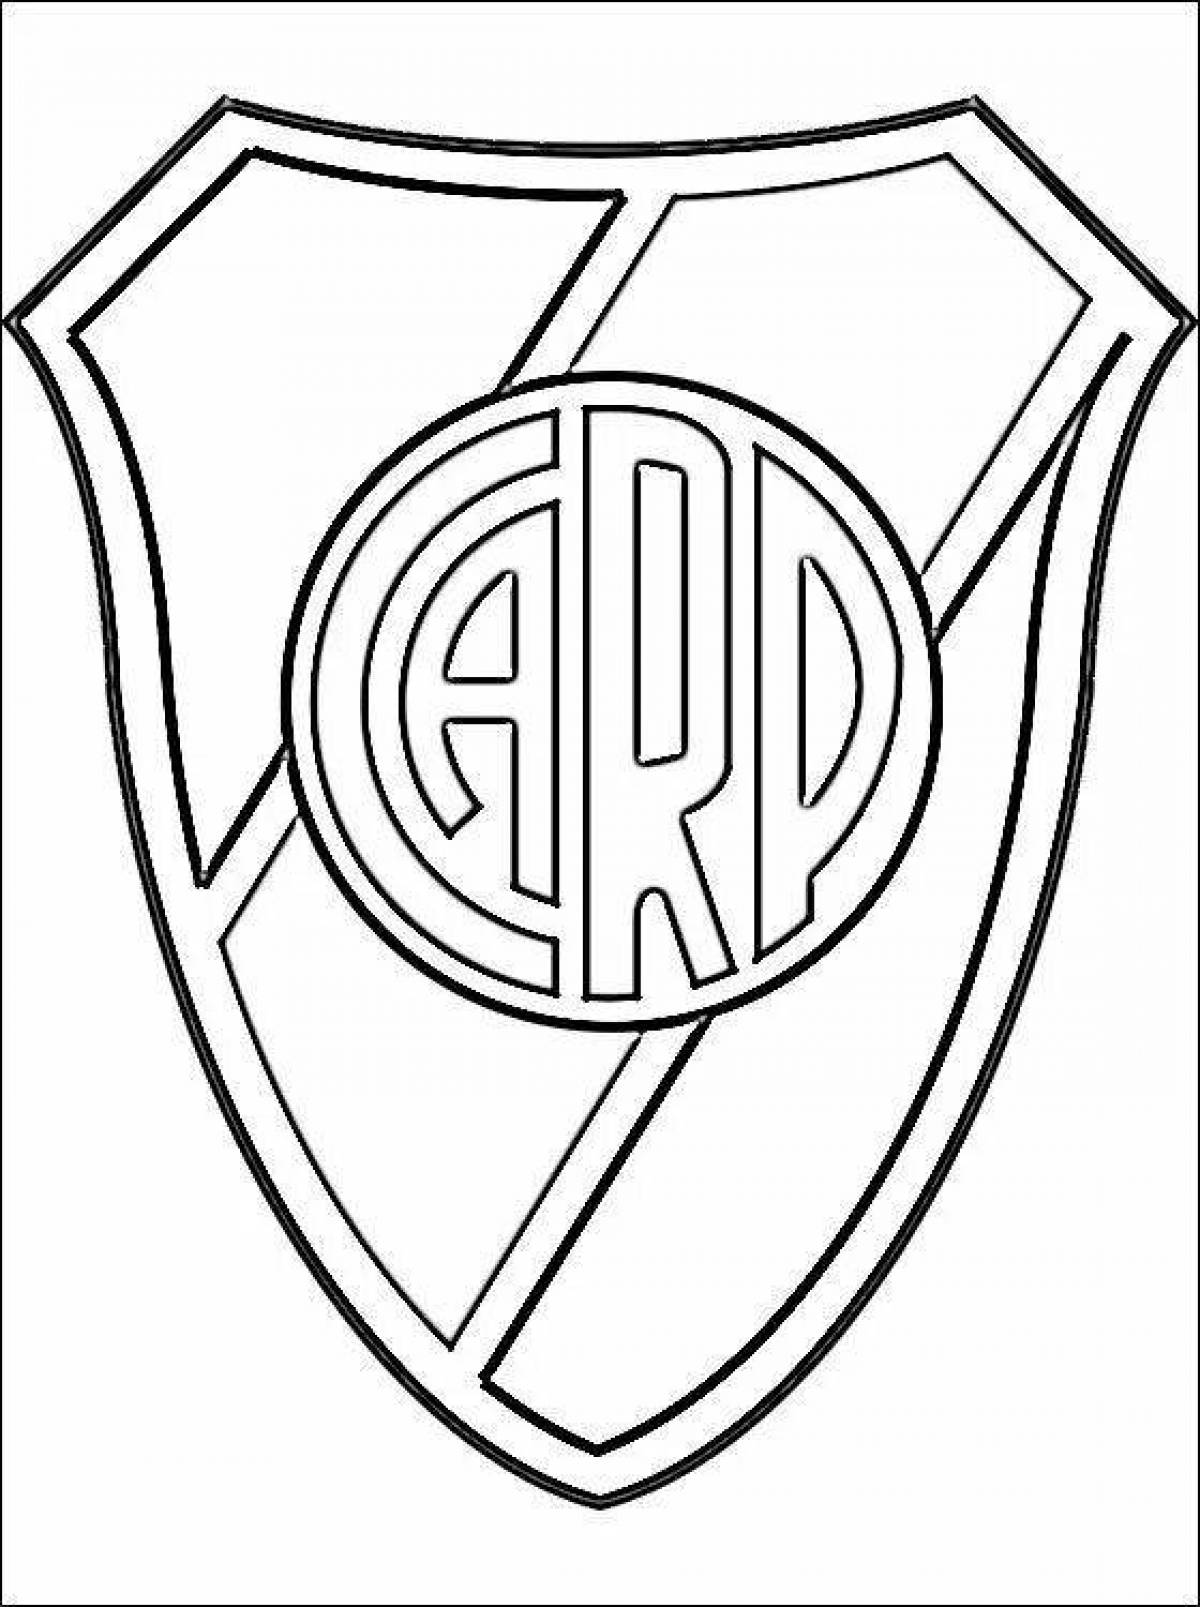 Great coloring of the emblem of football clubs